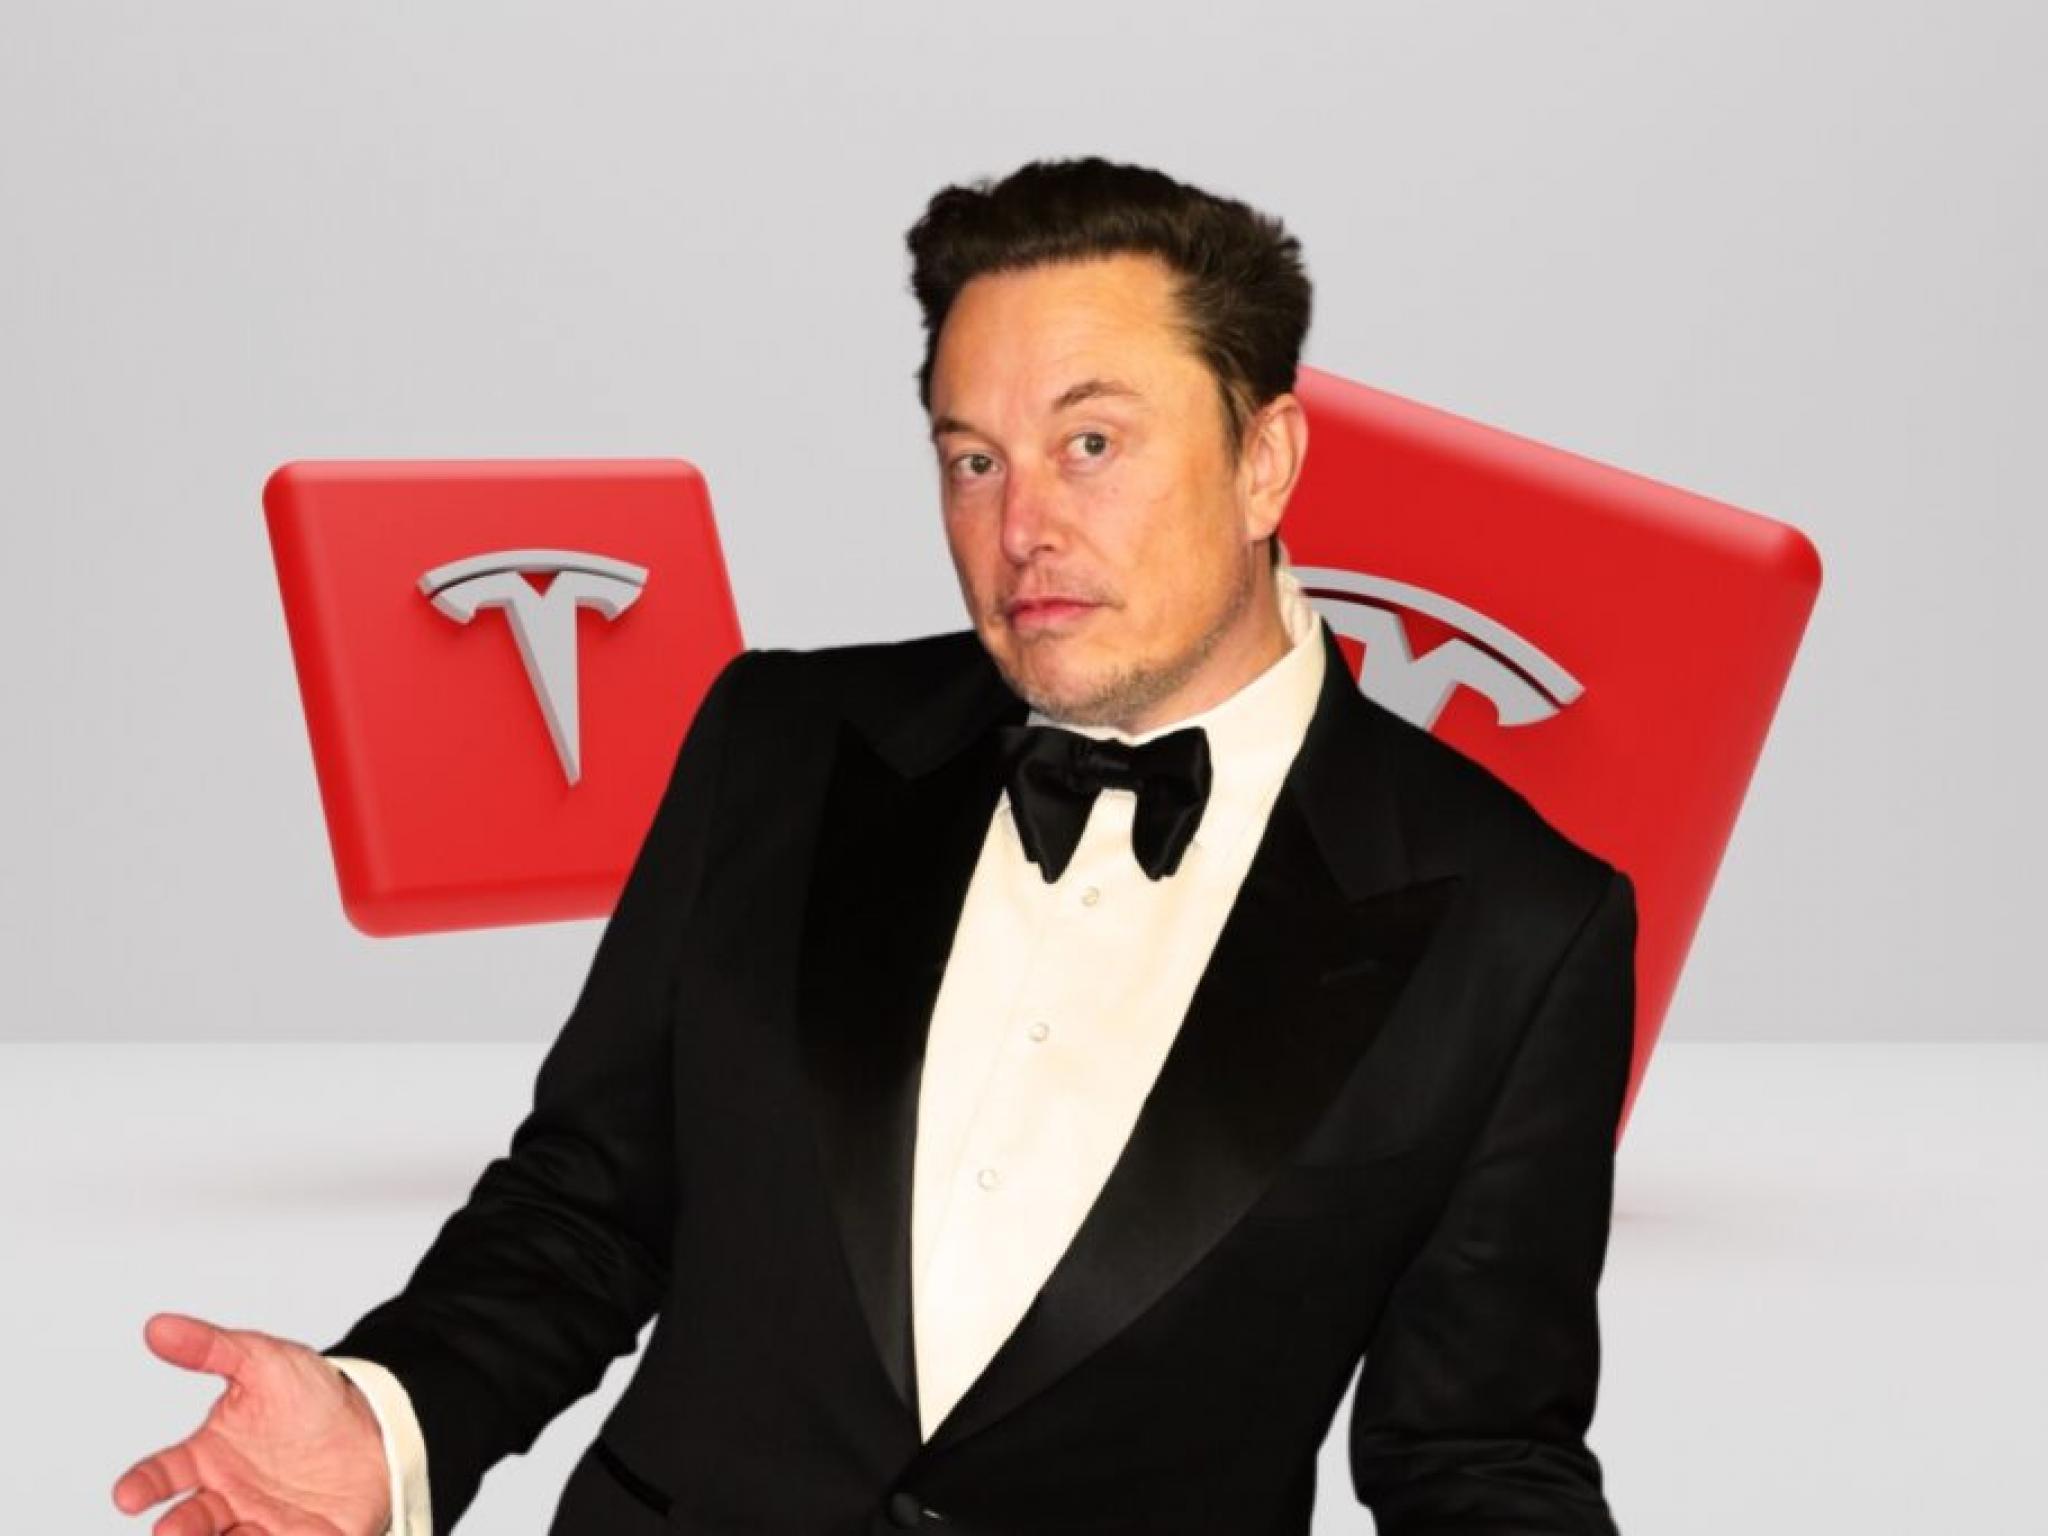  elon-musk-mocks-delaware-with-farewell-cake-after-shareholders-approve-move-to-texas-vox-populi-vox-dei 